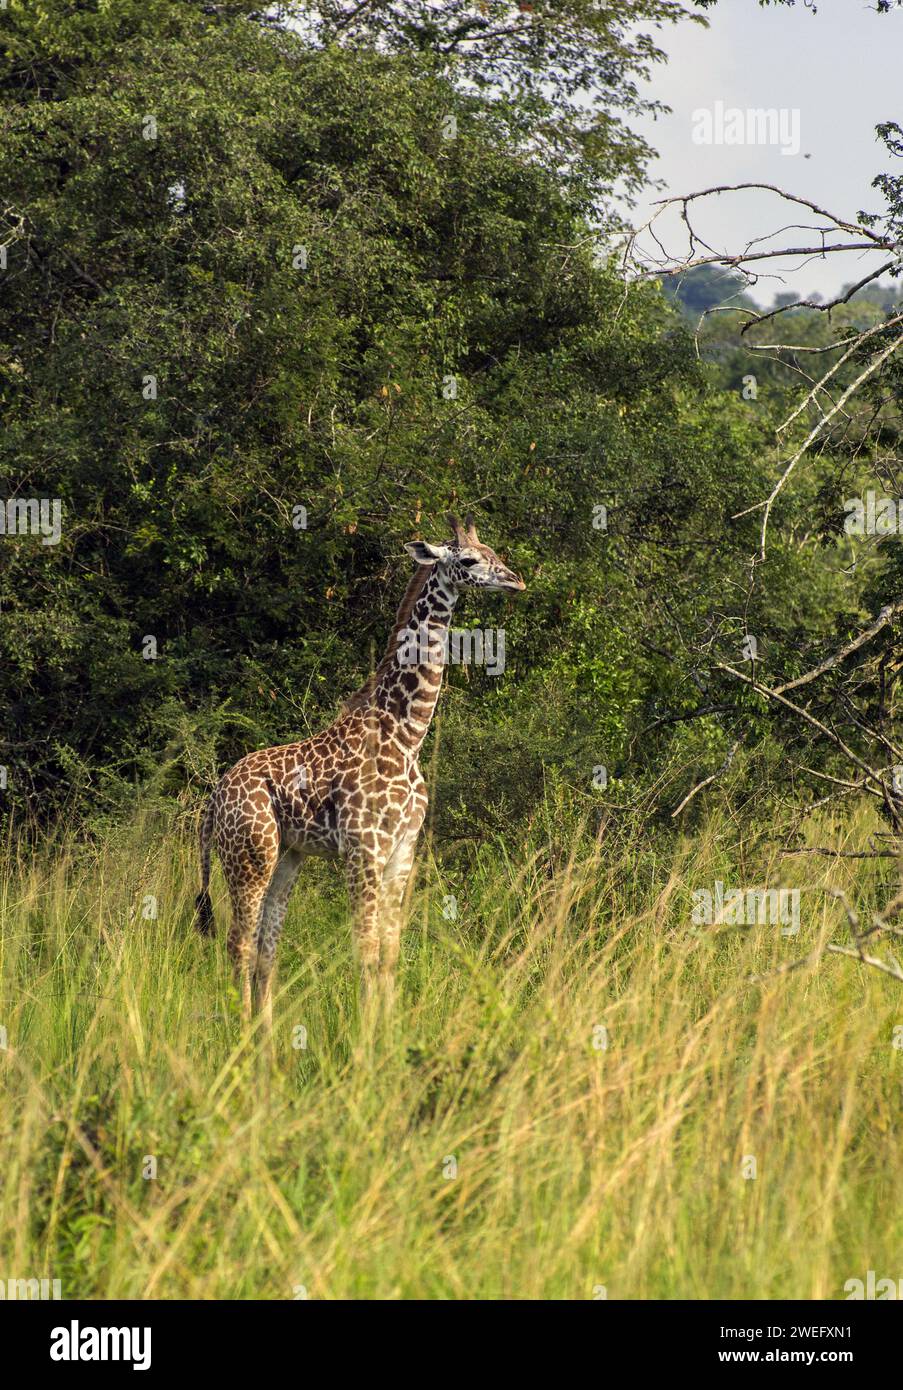 Young or baby giraffe photographed on safari in Akagera National Park in Northeast Rwanda, Central Africa’s largest protected wetland. Africa Parks Stock Photo